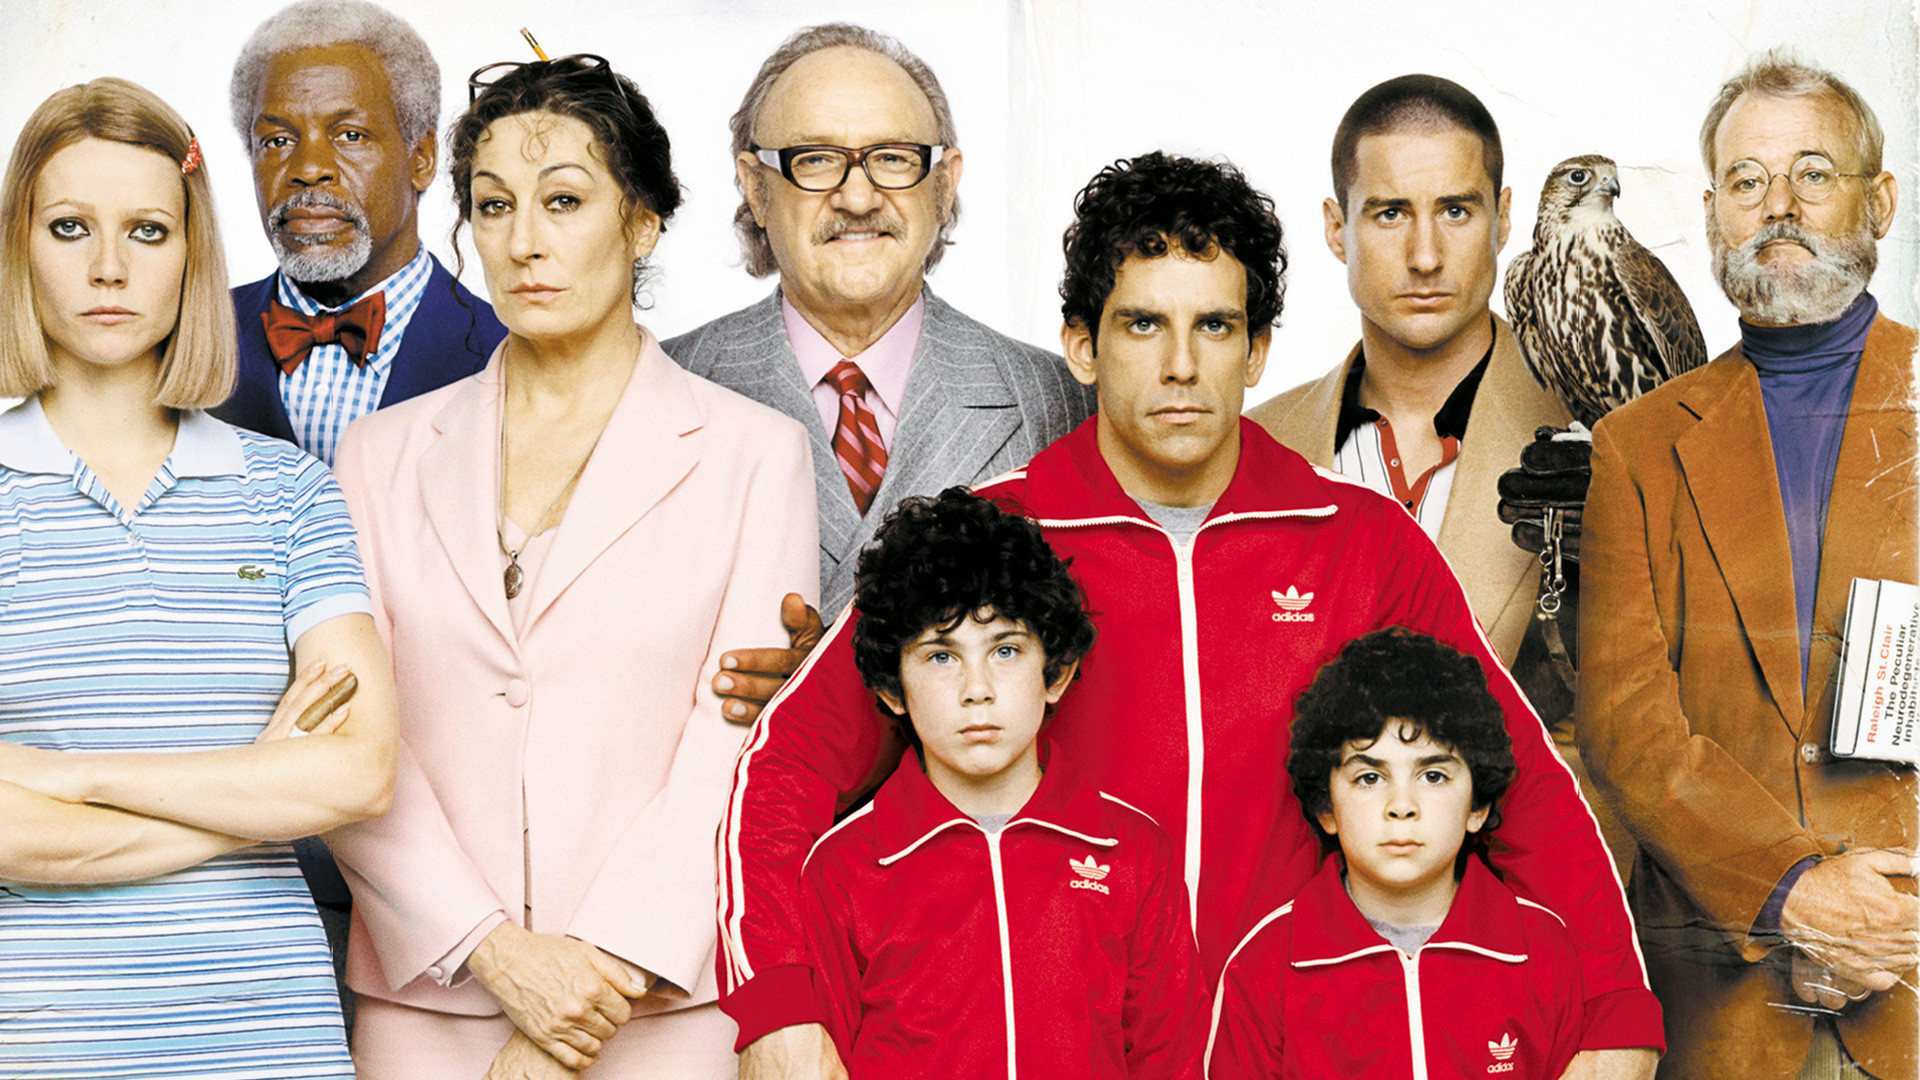 A group photo of nine characters and a bird from the film The Royal Tenenbaums